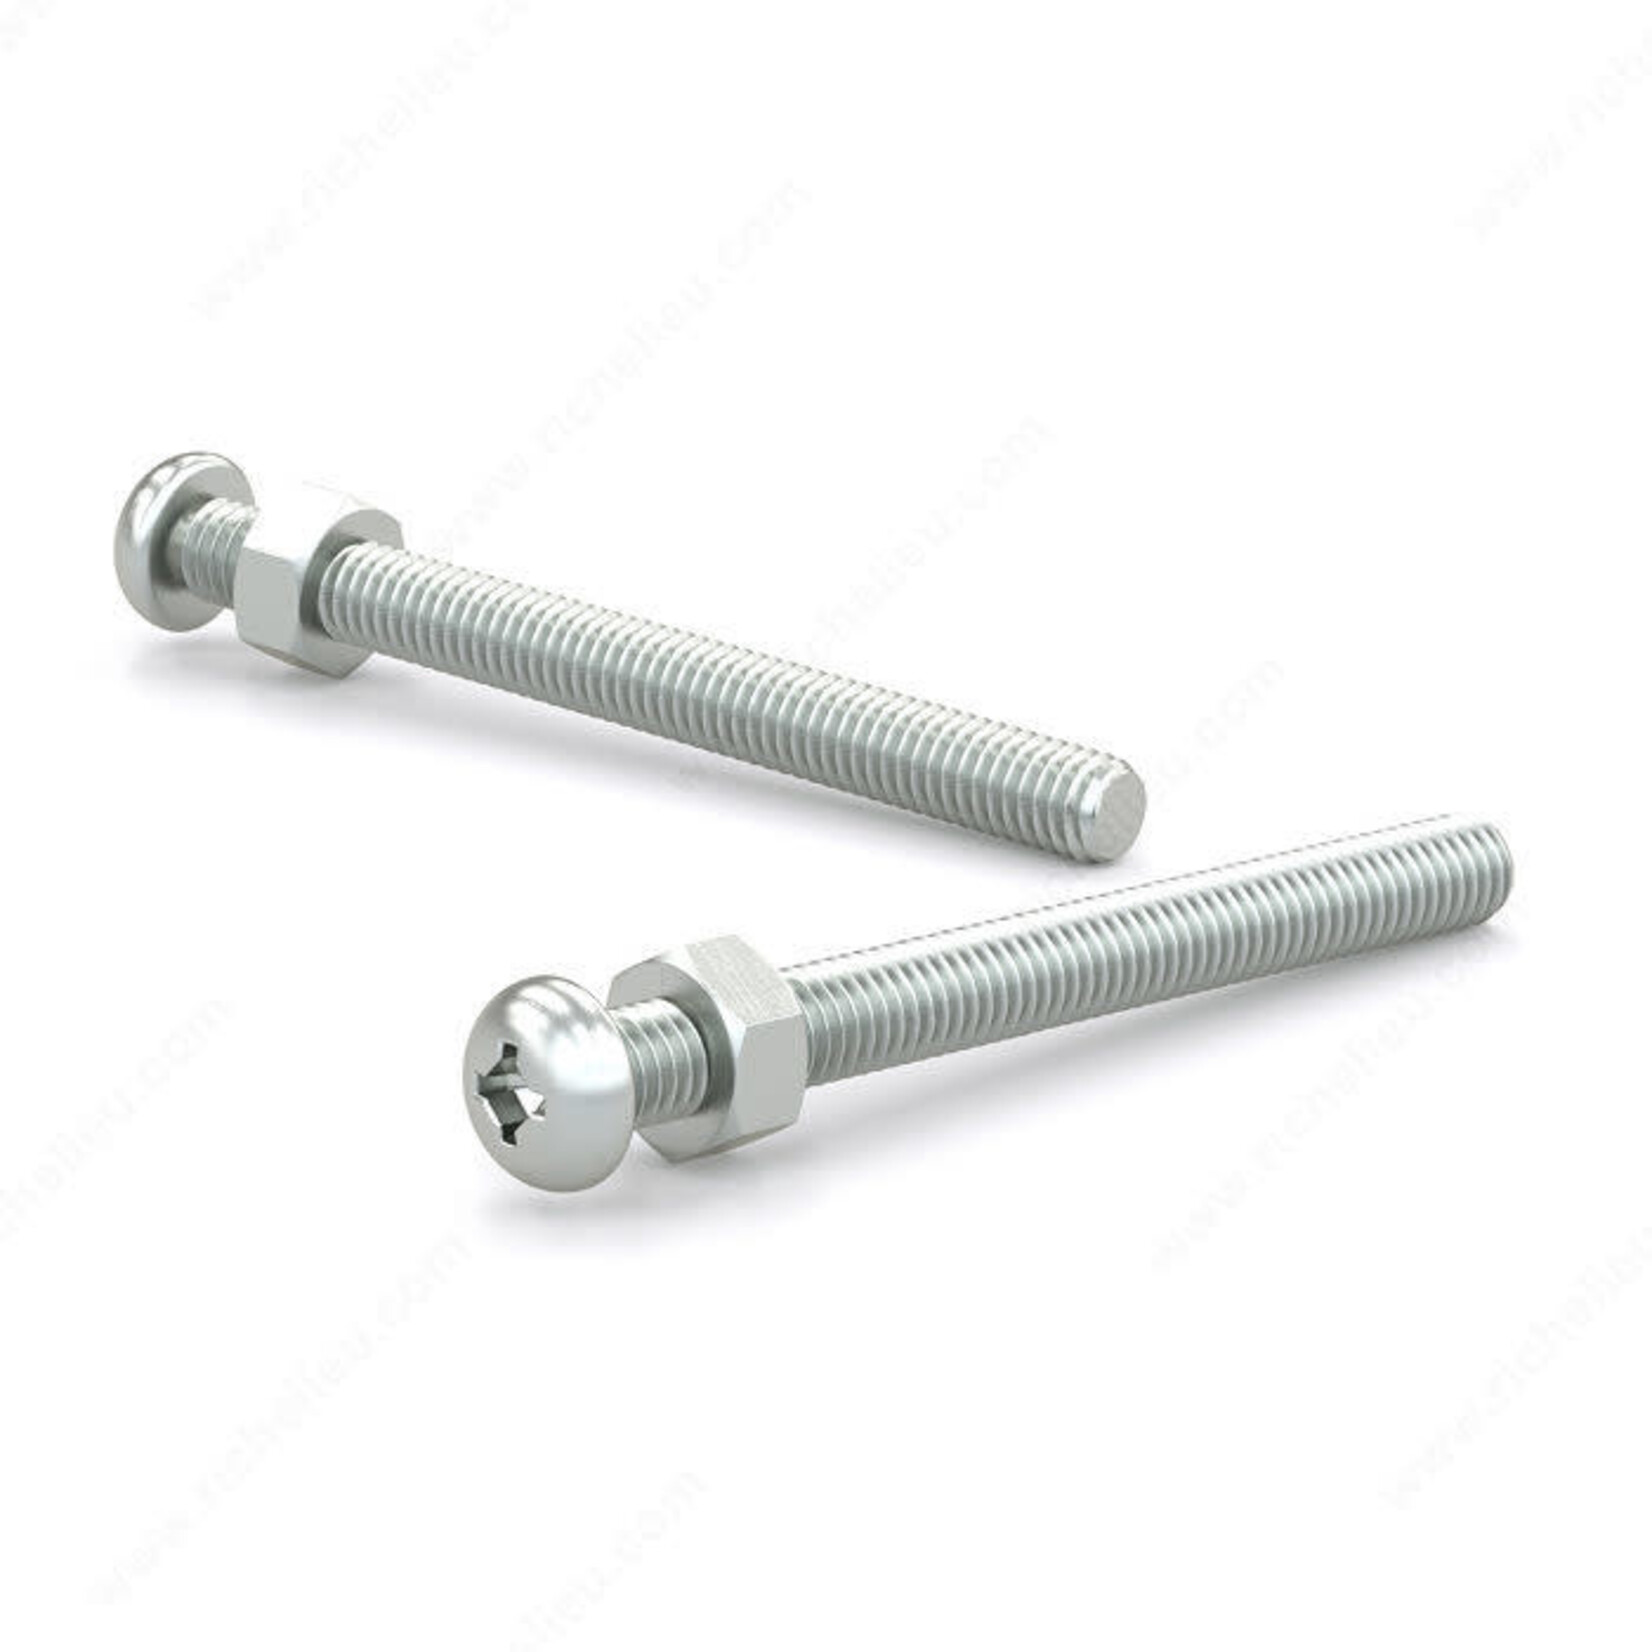 RELIABLE MACHINE SCREW WITH NUT, PAN HEAD, 10-24 2-1/2IN, 6PK BLISTER